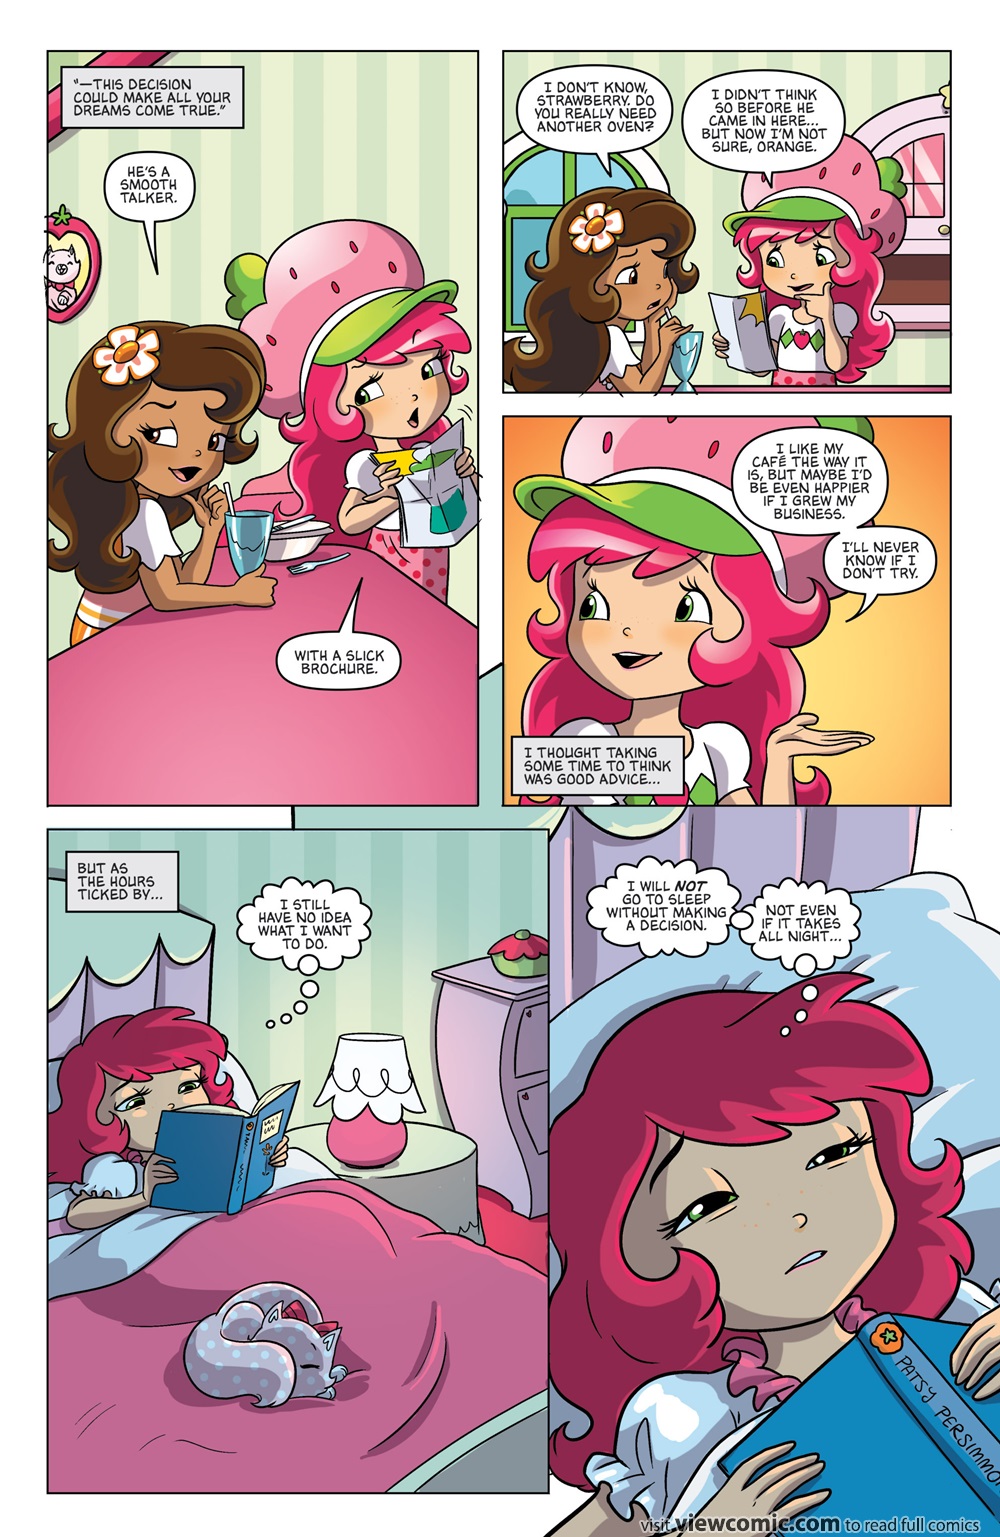 Strawberry Shortcake 003 2016 | Read Strawberry Shortcake 003 2016 comic  online in high quality. Read Full Comic online for free - Read comics  online in high quality .| READ COMIC ONLINE